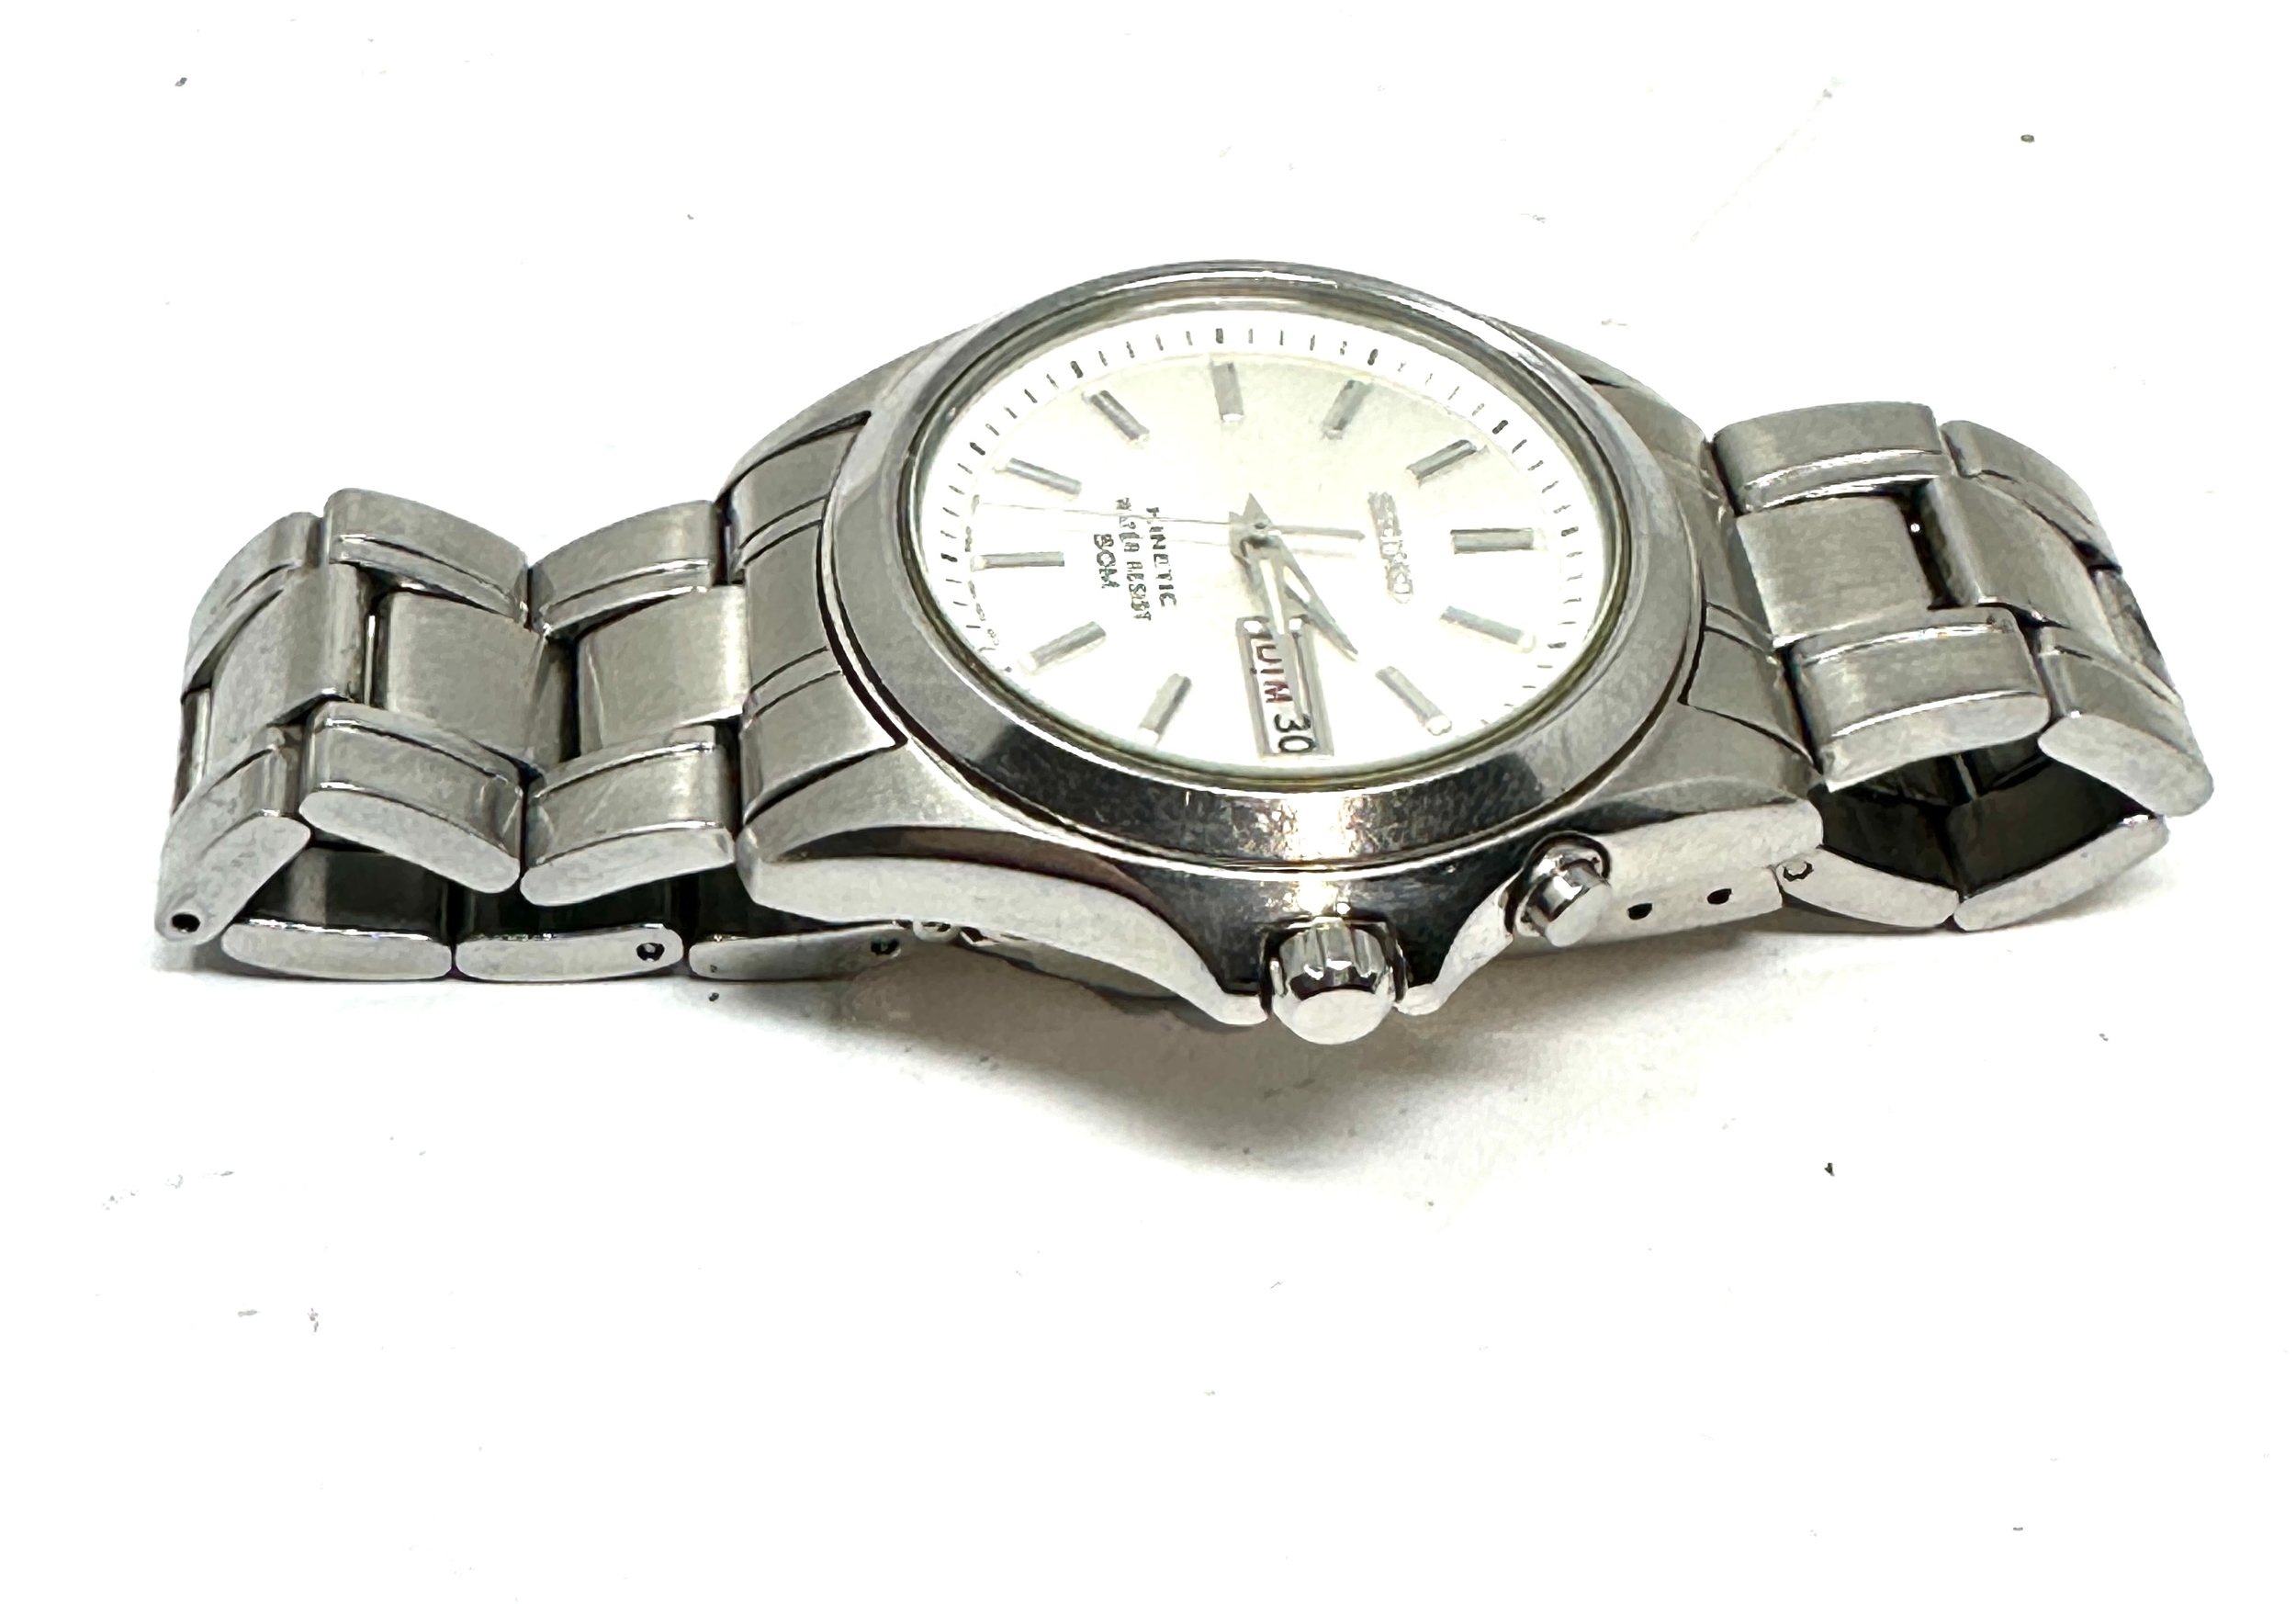 Gents Seiko Kinetic Watch 5M63-0B90 - 50m the watch is ticking - Image 2 of 6